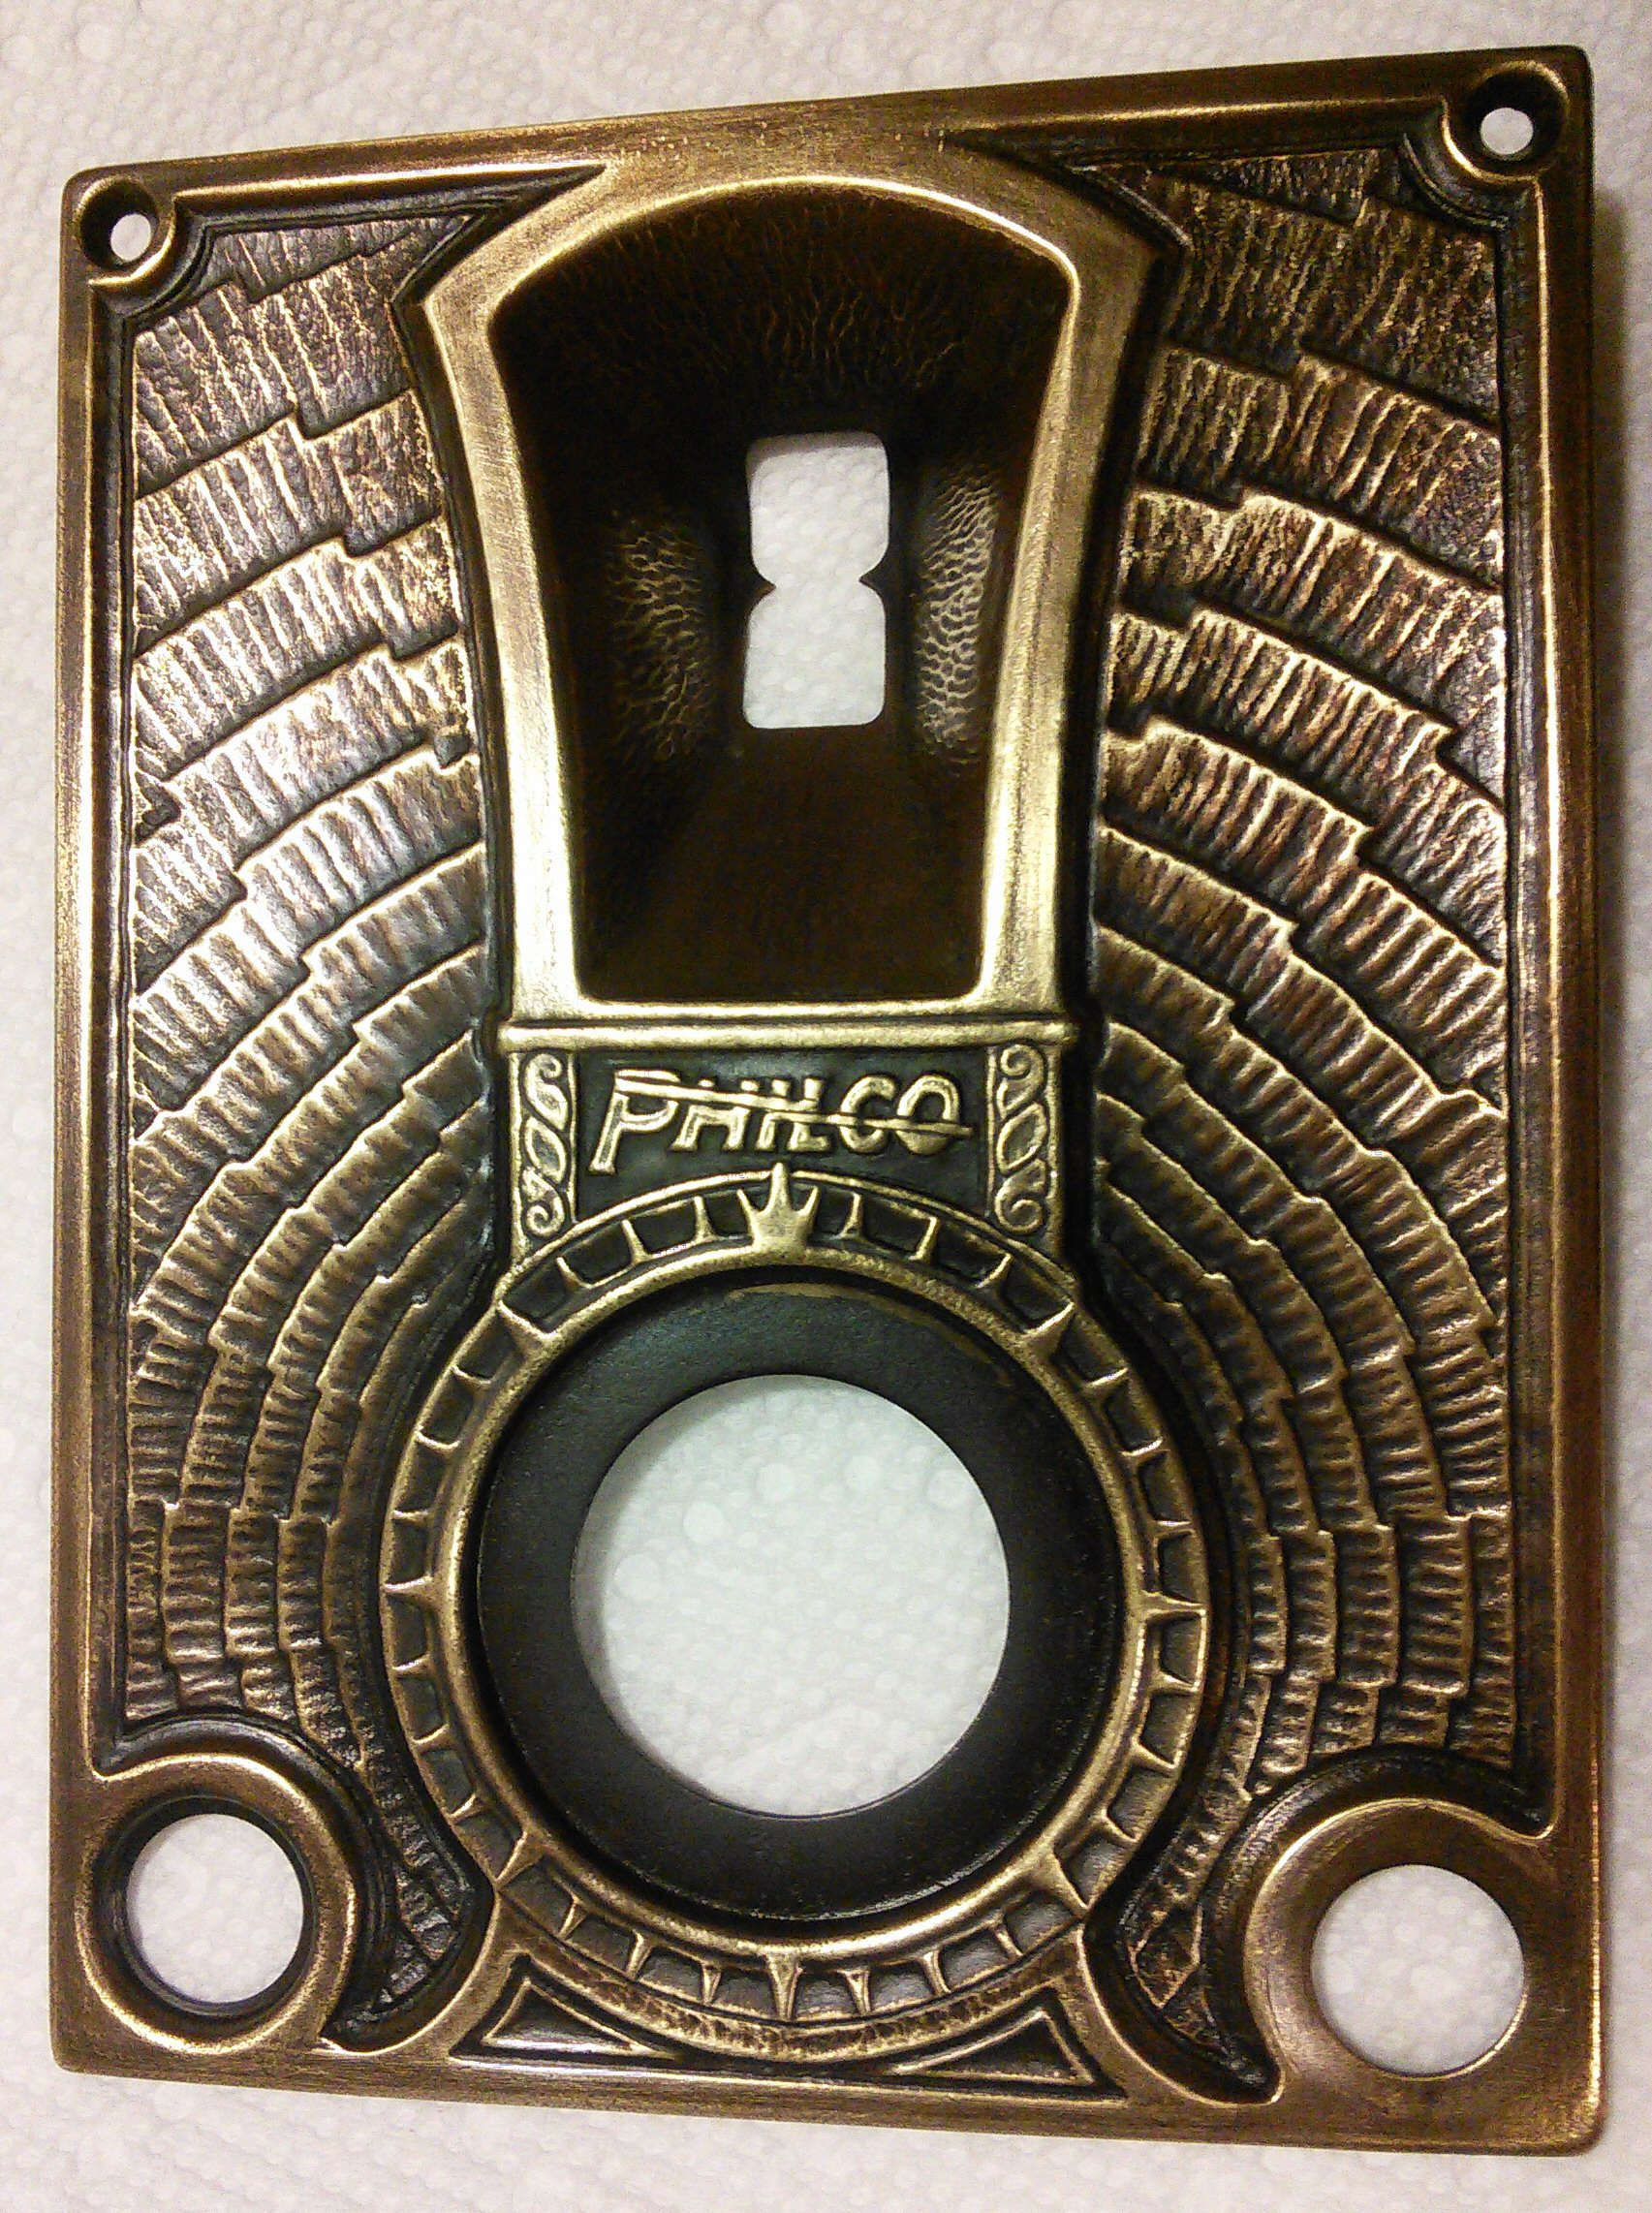 Philco 511 vintage radio faceplate, polished, owned by don fulton